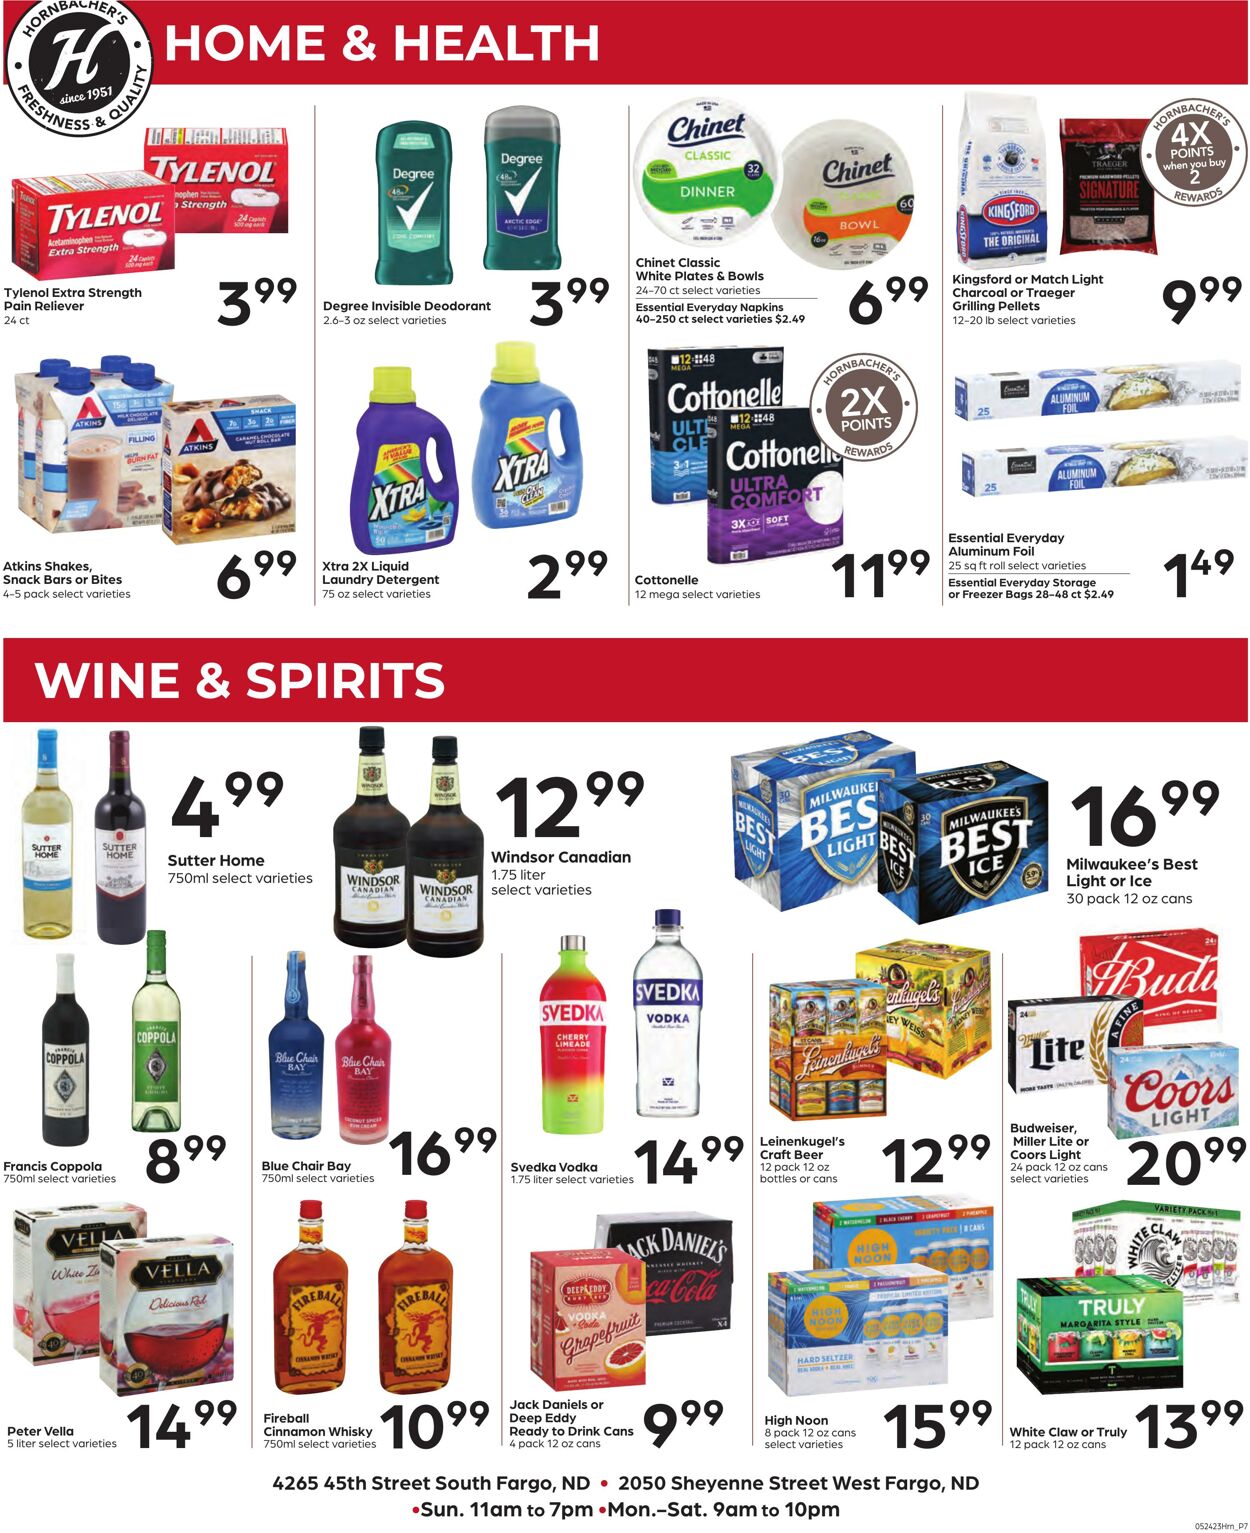 Weekly ad Hornbacher's 05/24/2023 - 05/30/2023